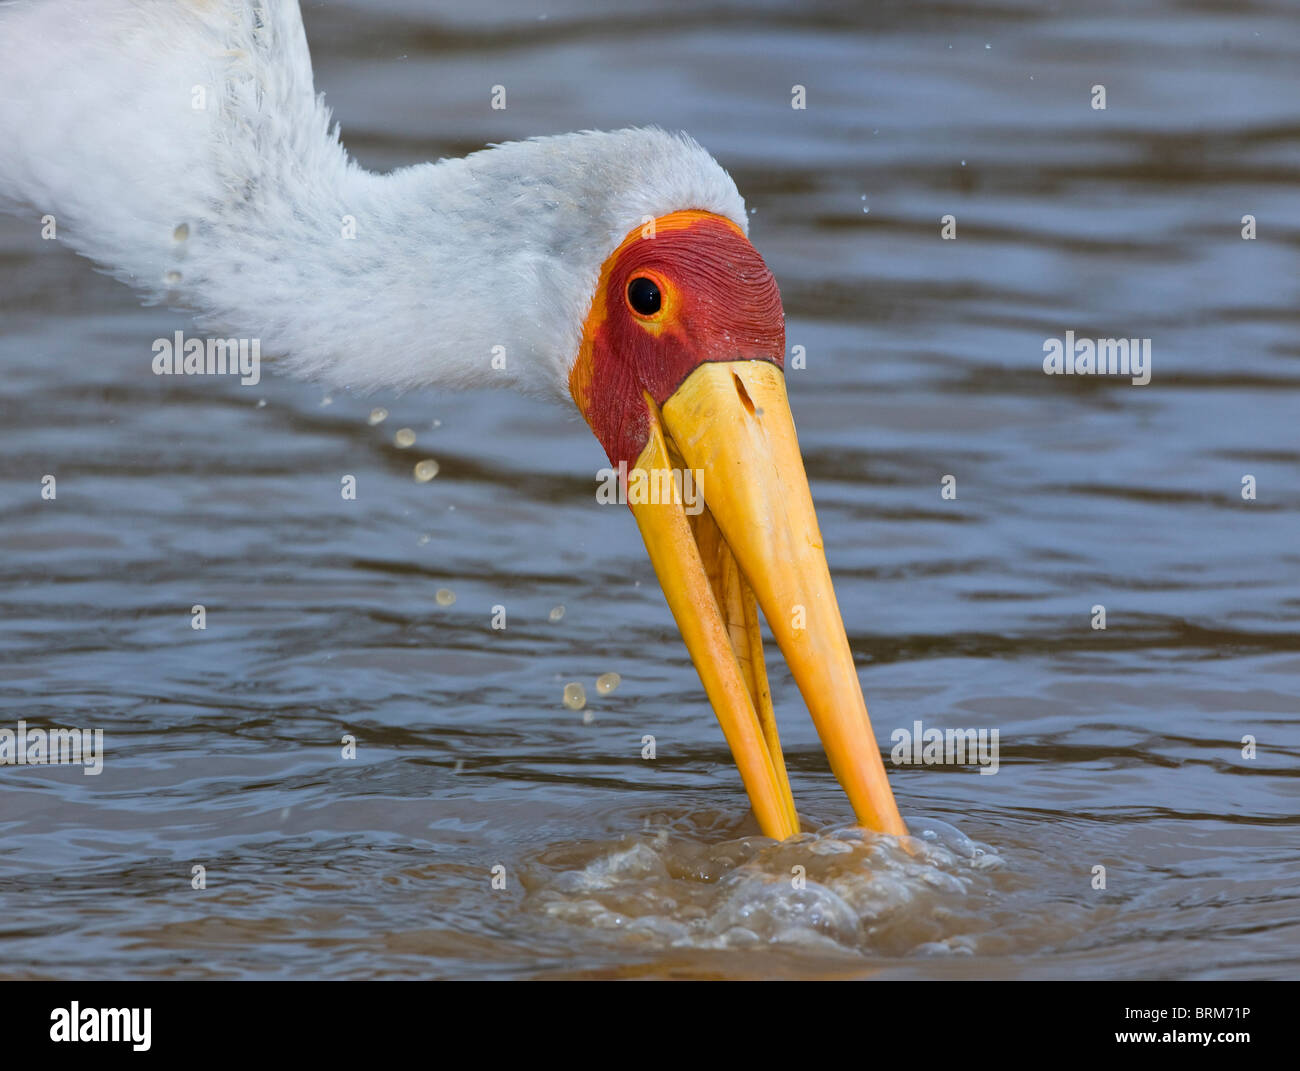 Yellow-billed stork foraging in water Stock Photo